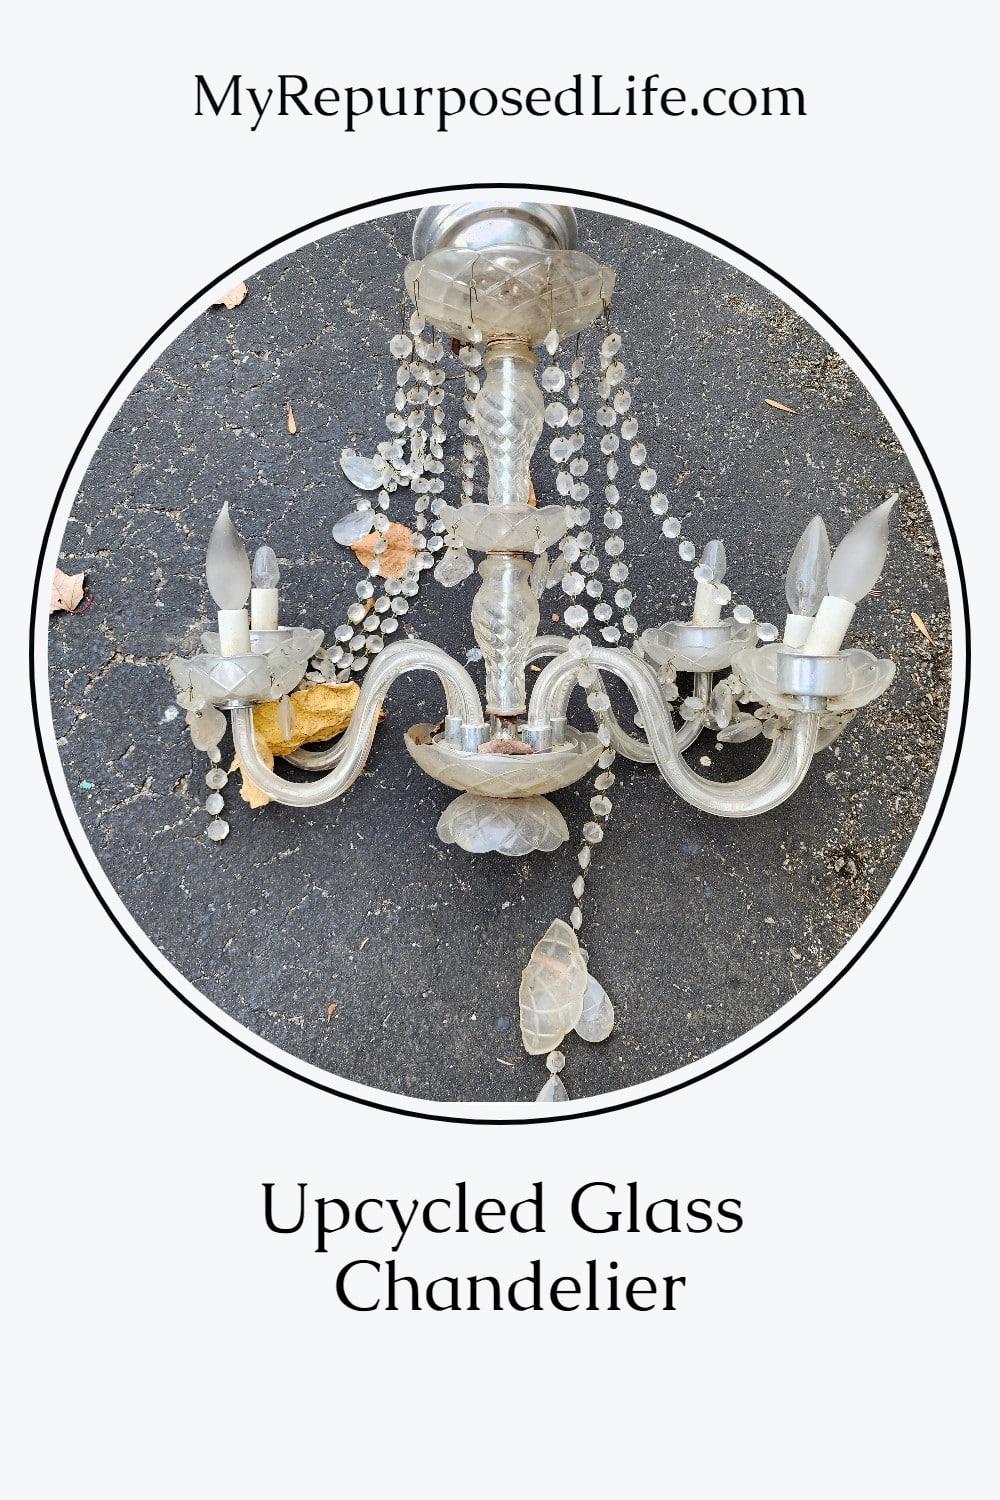 Upcycled glass chandelier pieces and scrap wood are paired to make a set of beautiful DIY candlesticks. Tips and ideas for you. #MyRepurposedLife #upcycled #chandelier #diy #candlesticks via @repurposedlife